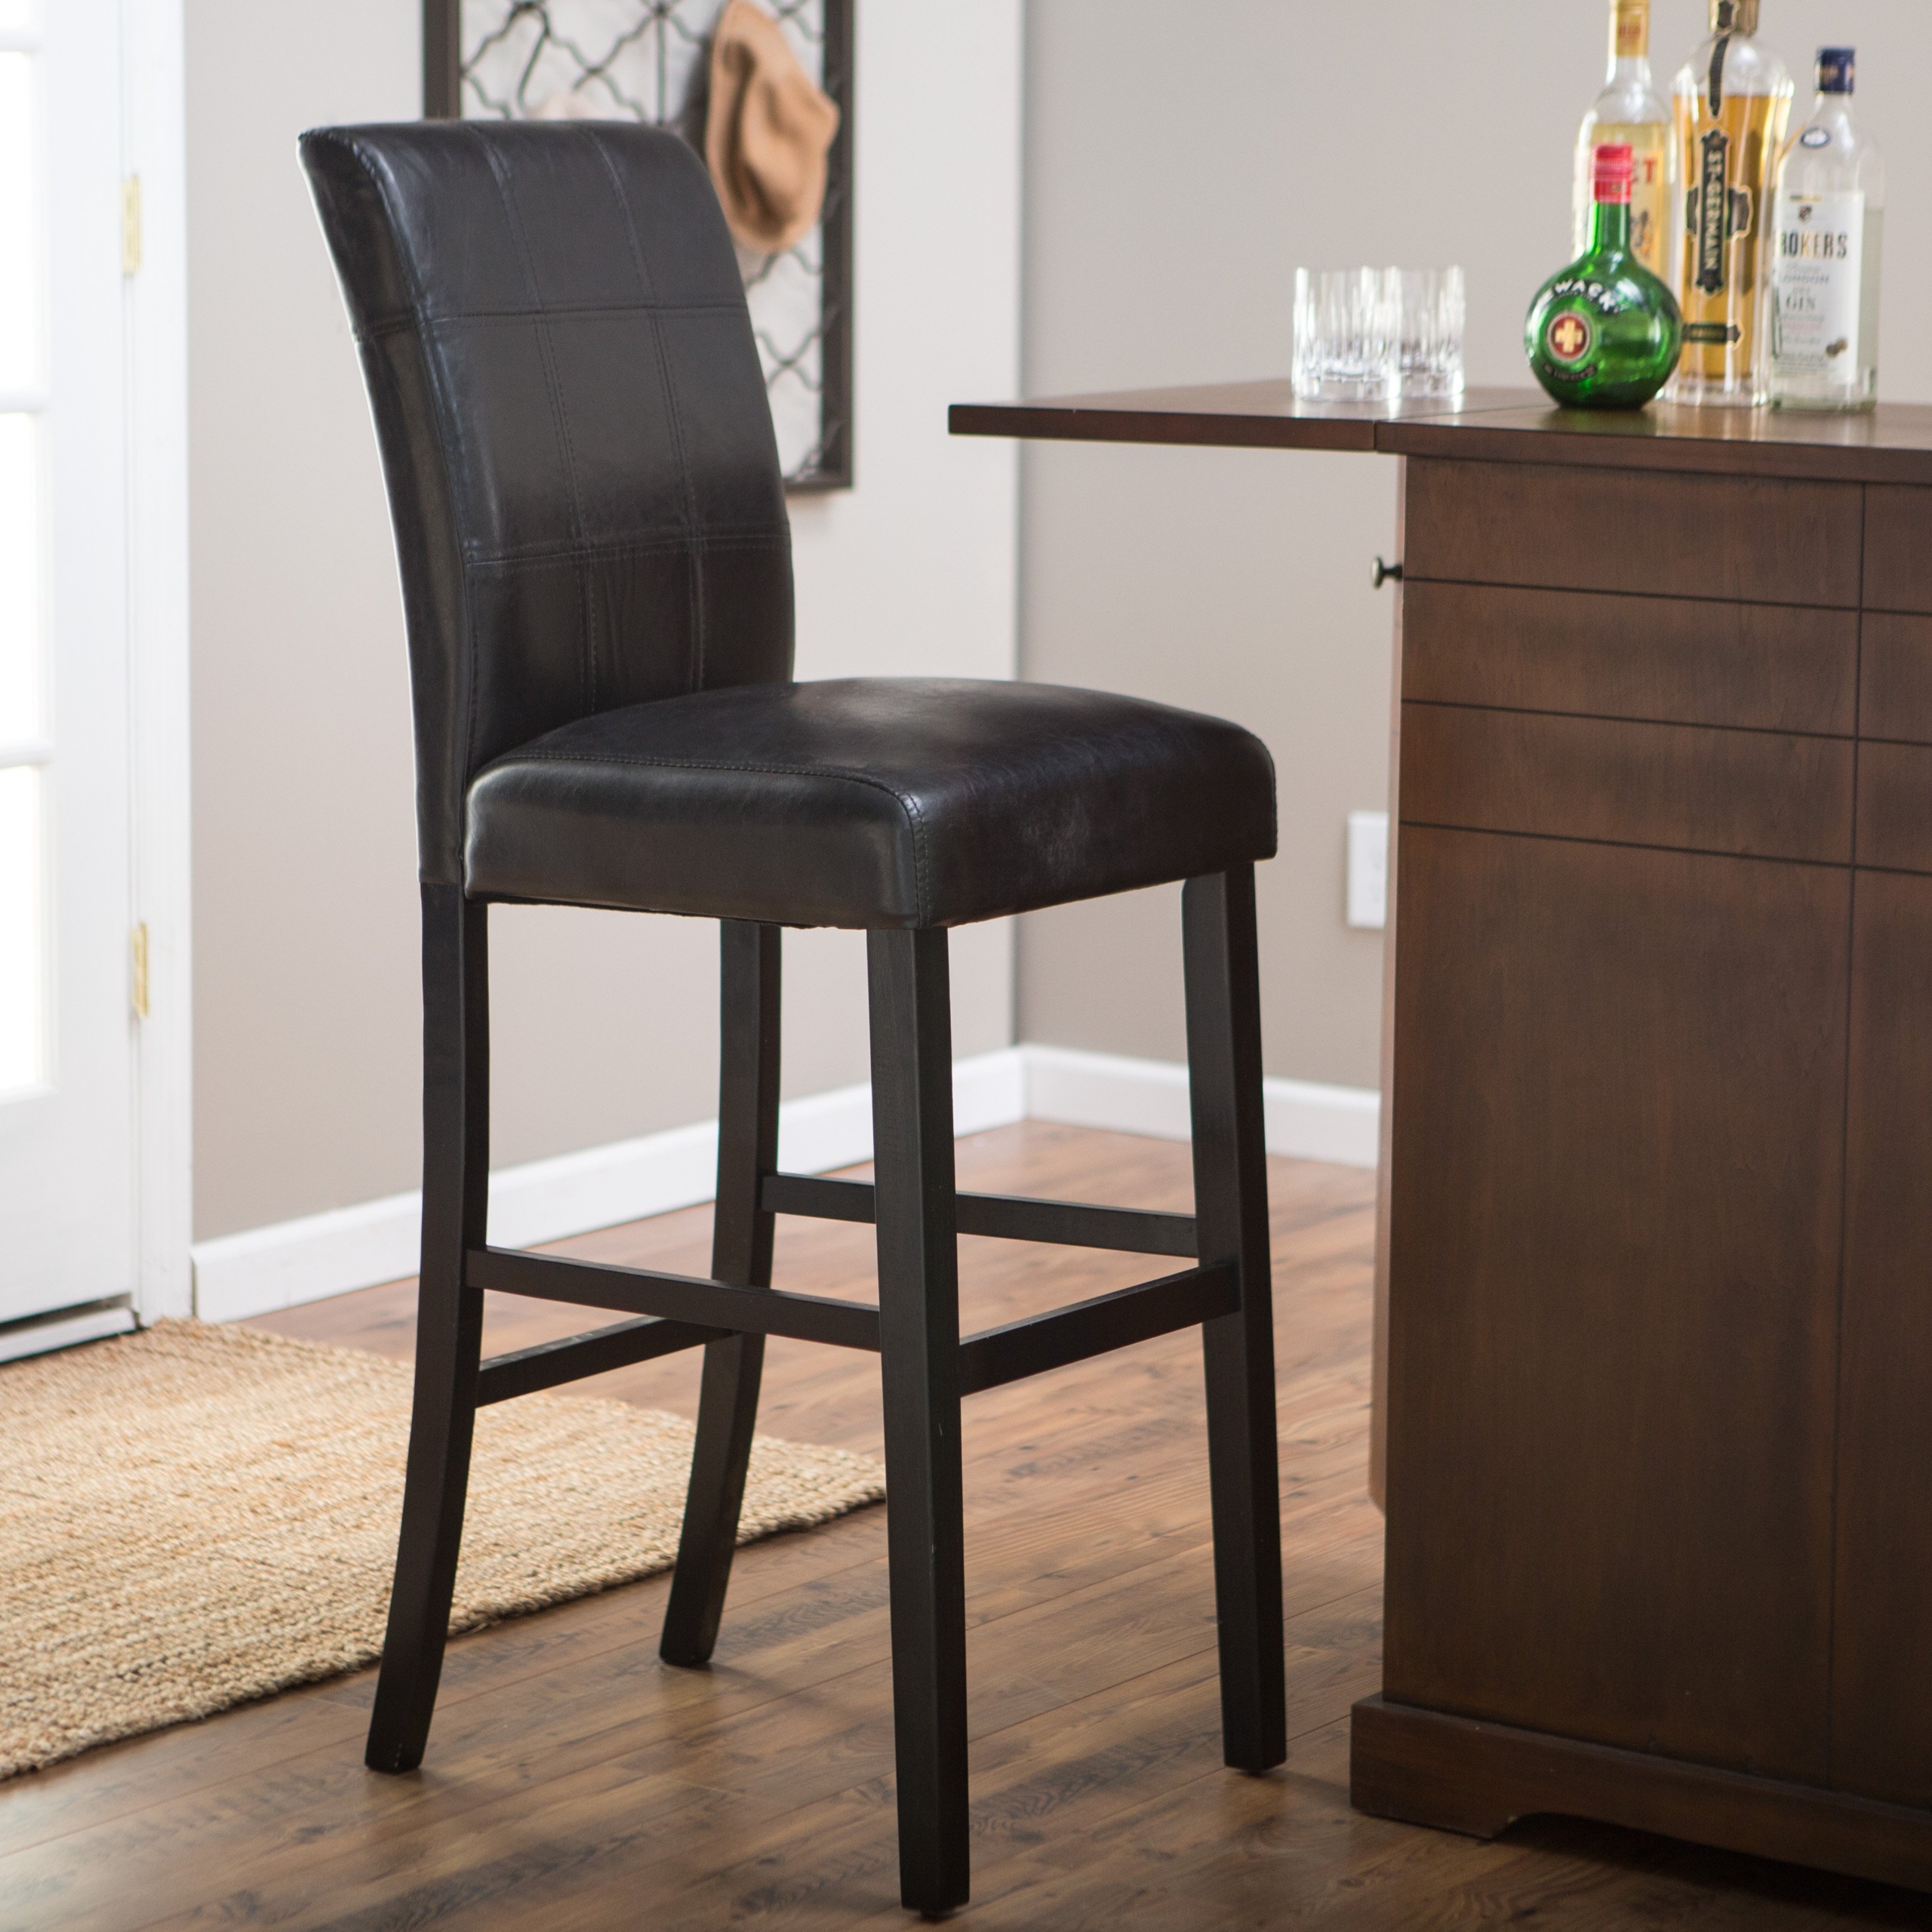 Leather bar stools with backs 15